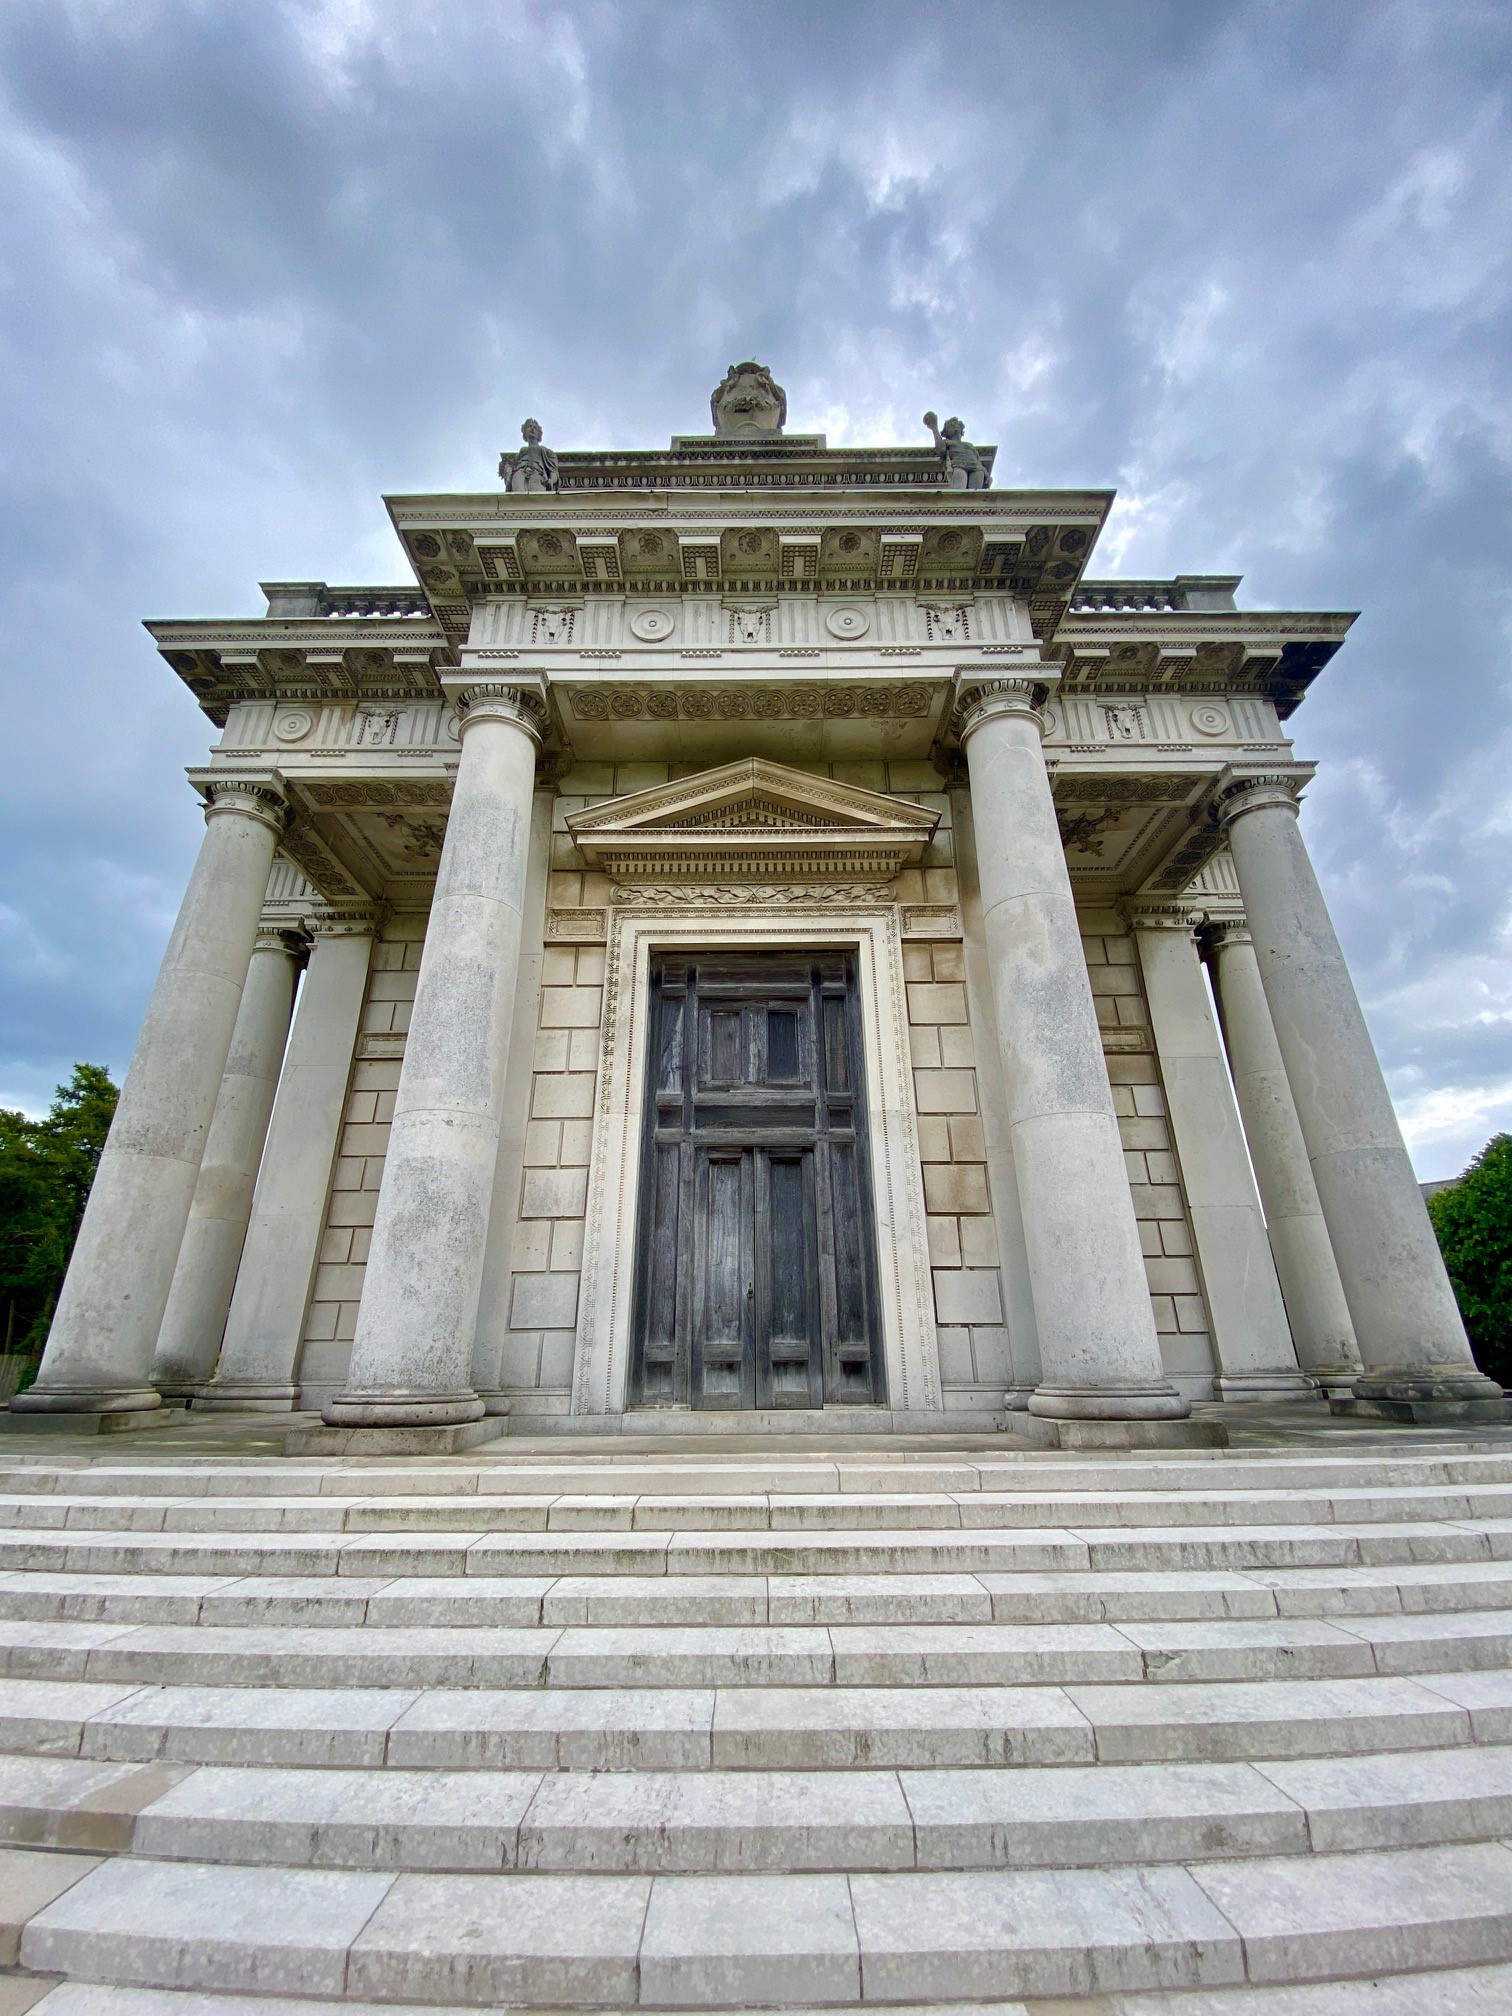 the northern facade of the Casino with its oak doors and Portland stone